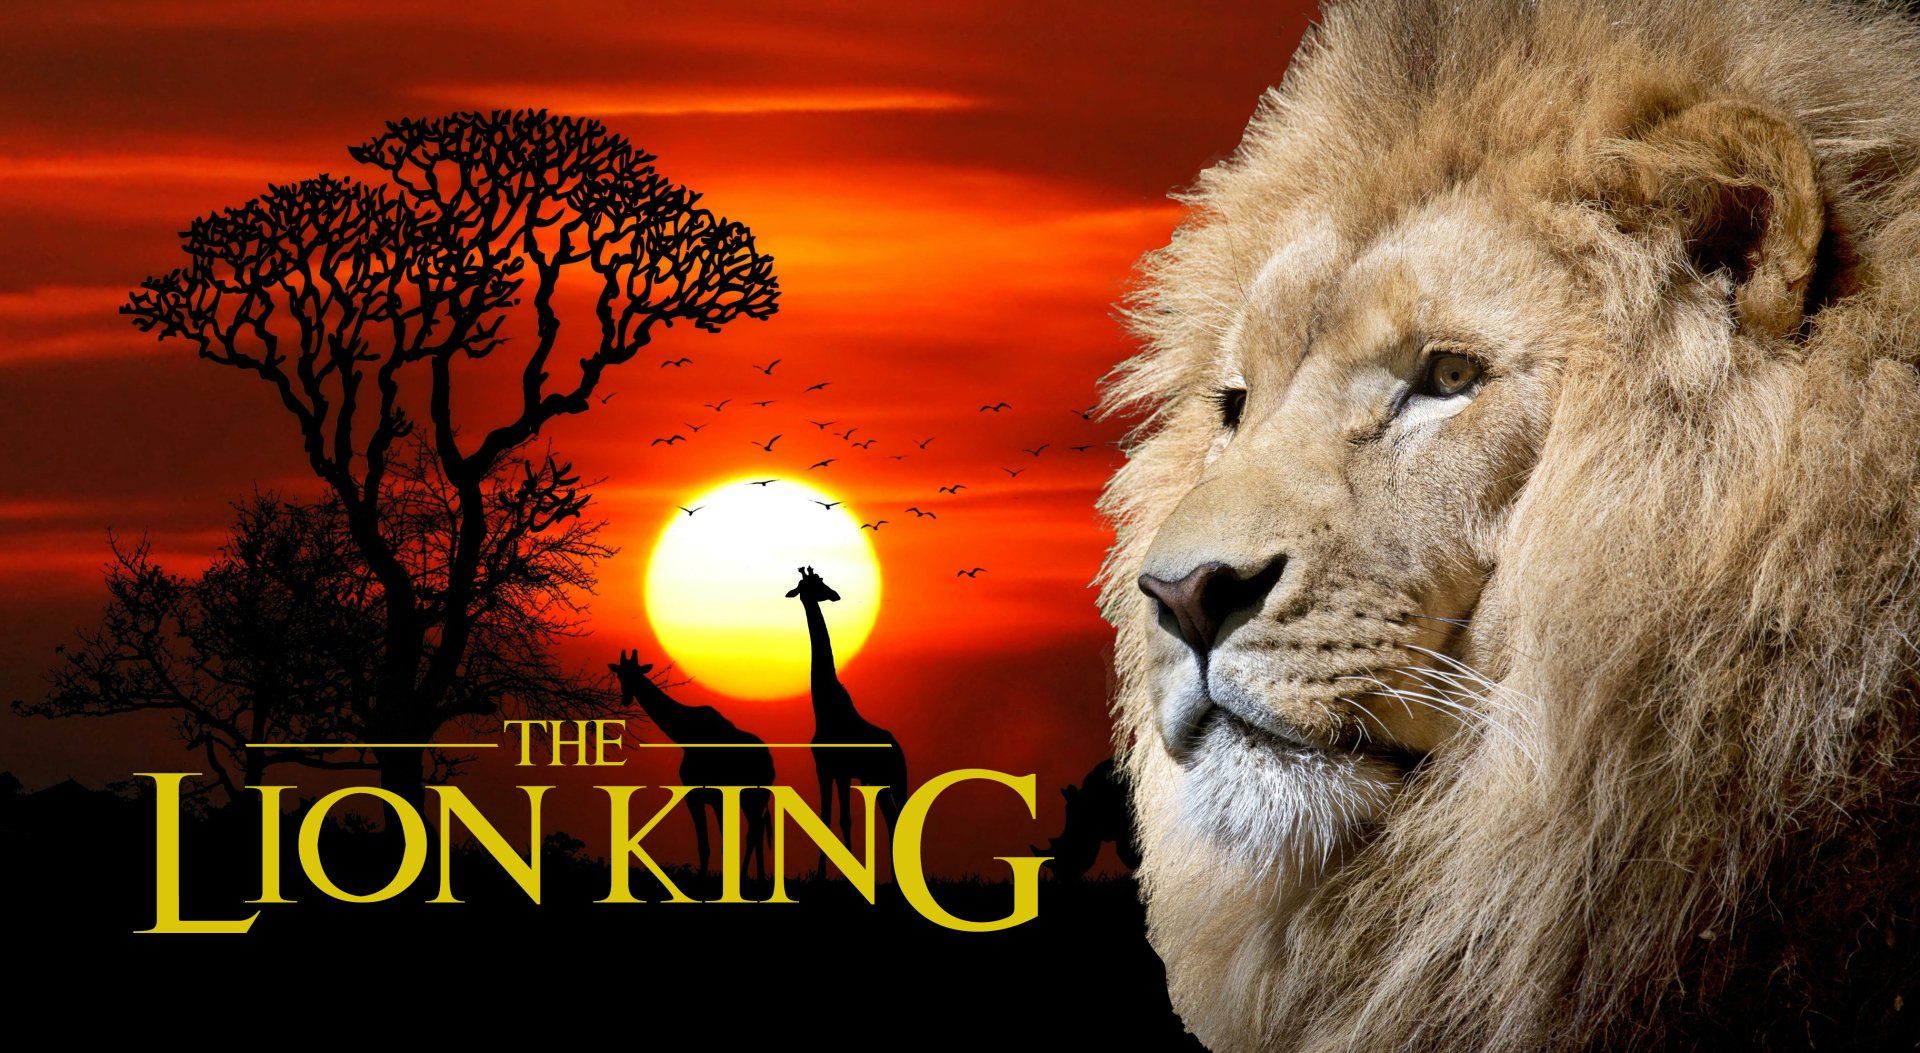 A poster for the movie the lion king with a lion and giraffes in the background.